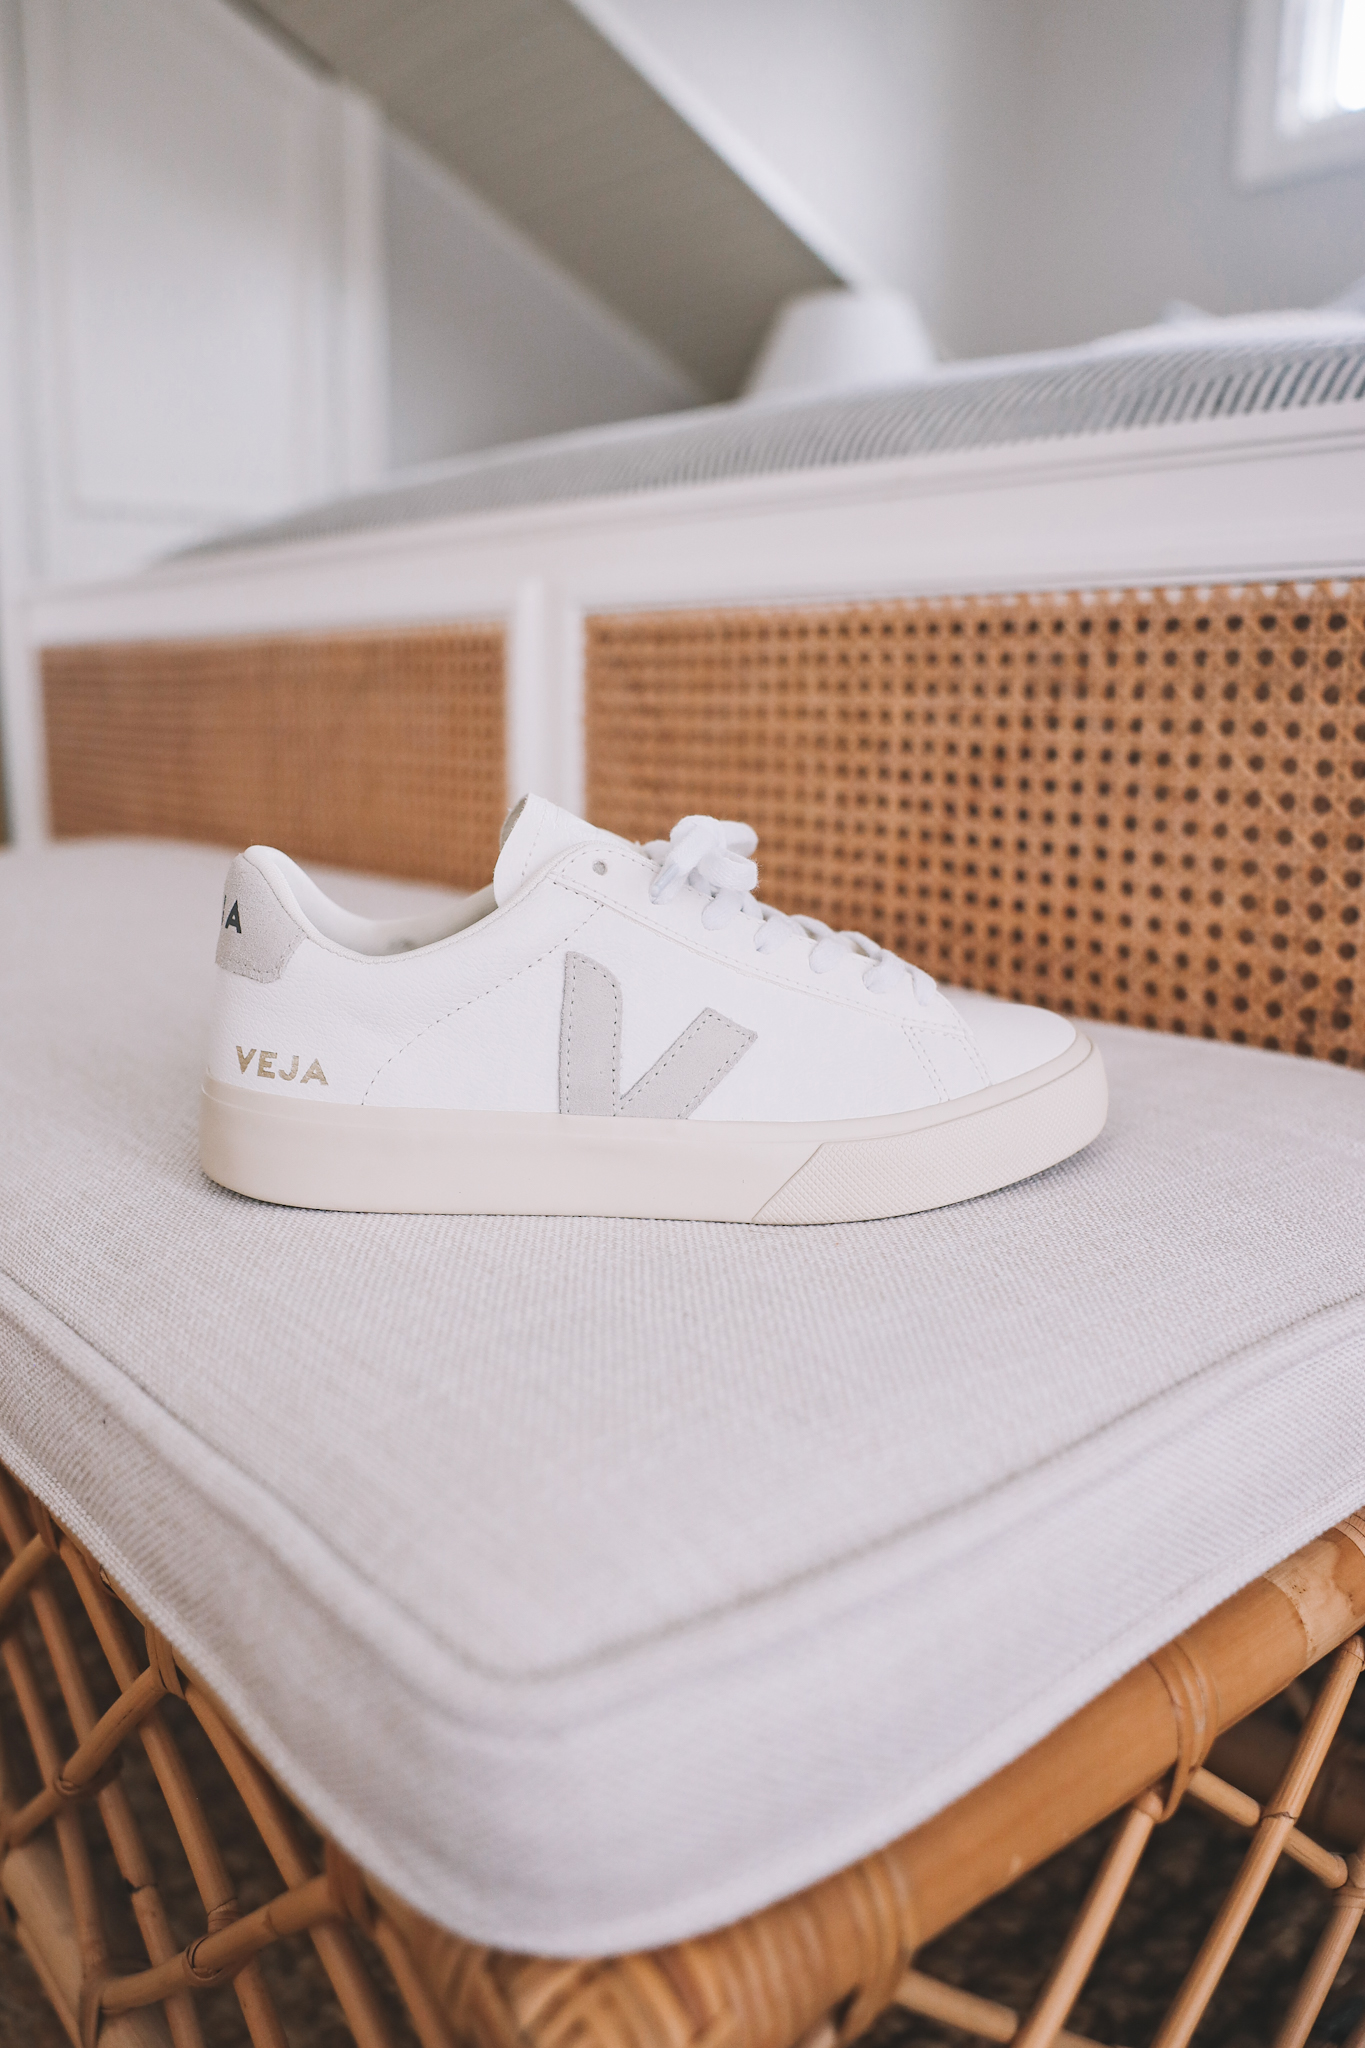 Recent Finds 2/11 - veja campo sneakers